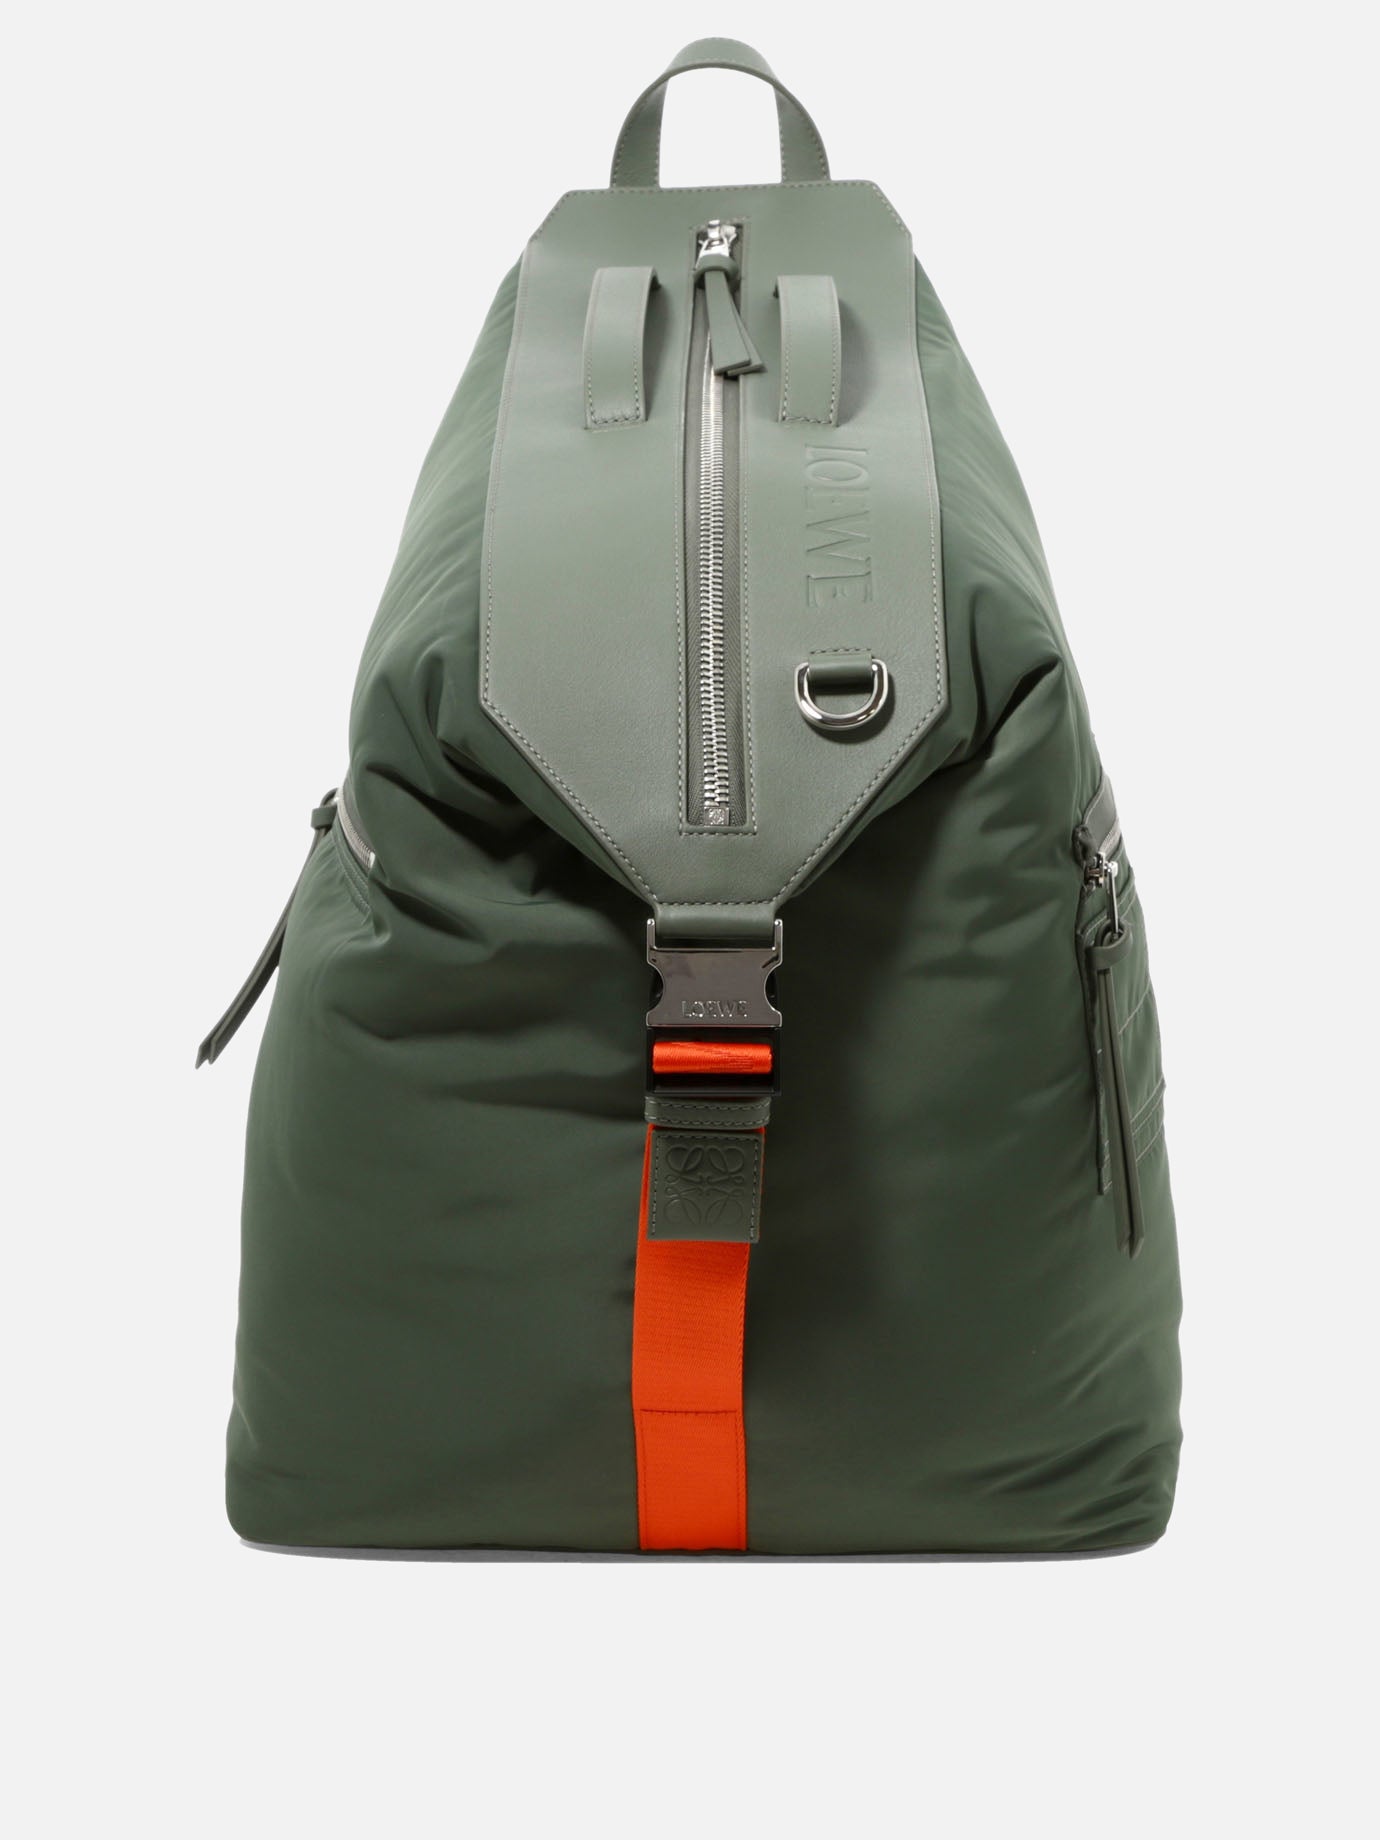 "Convertible" backpack